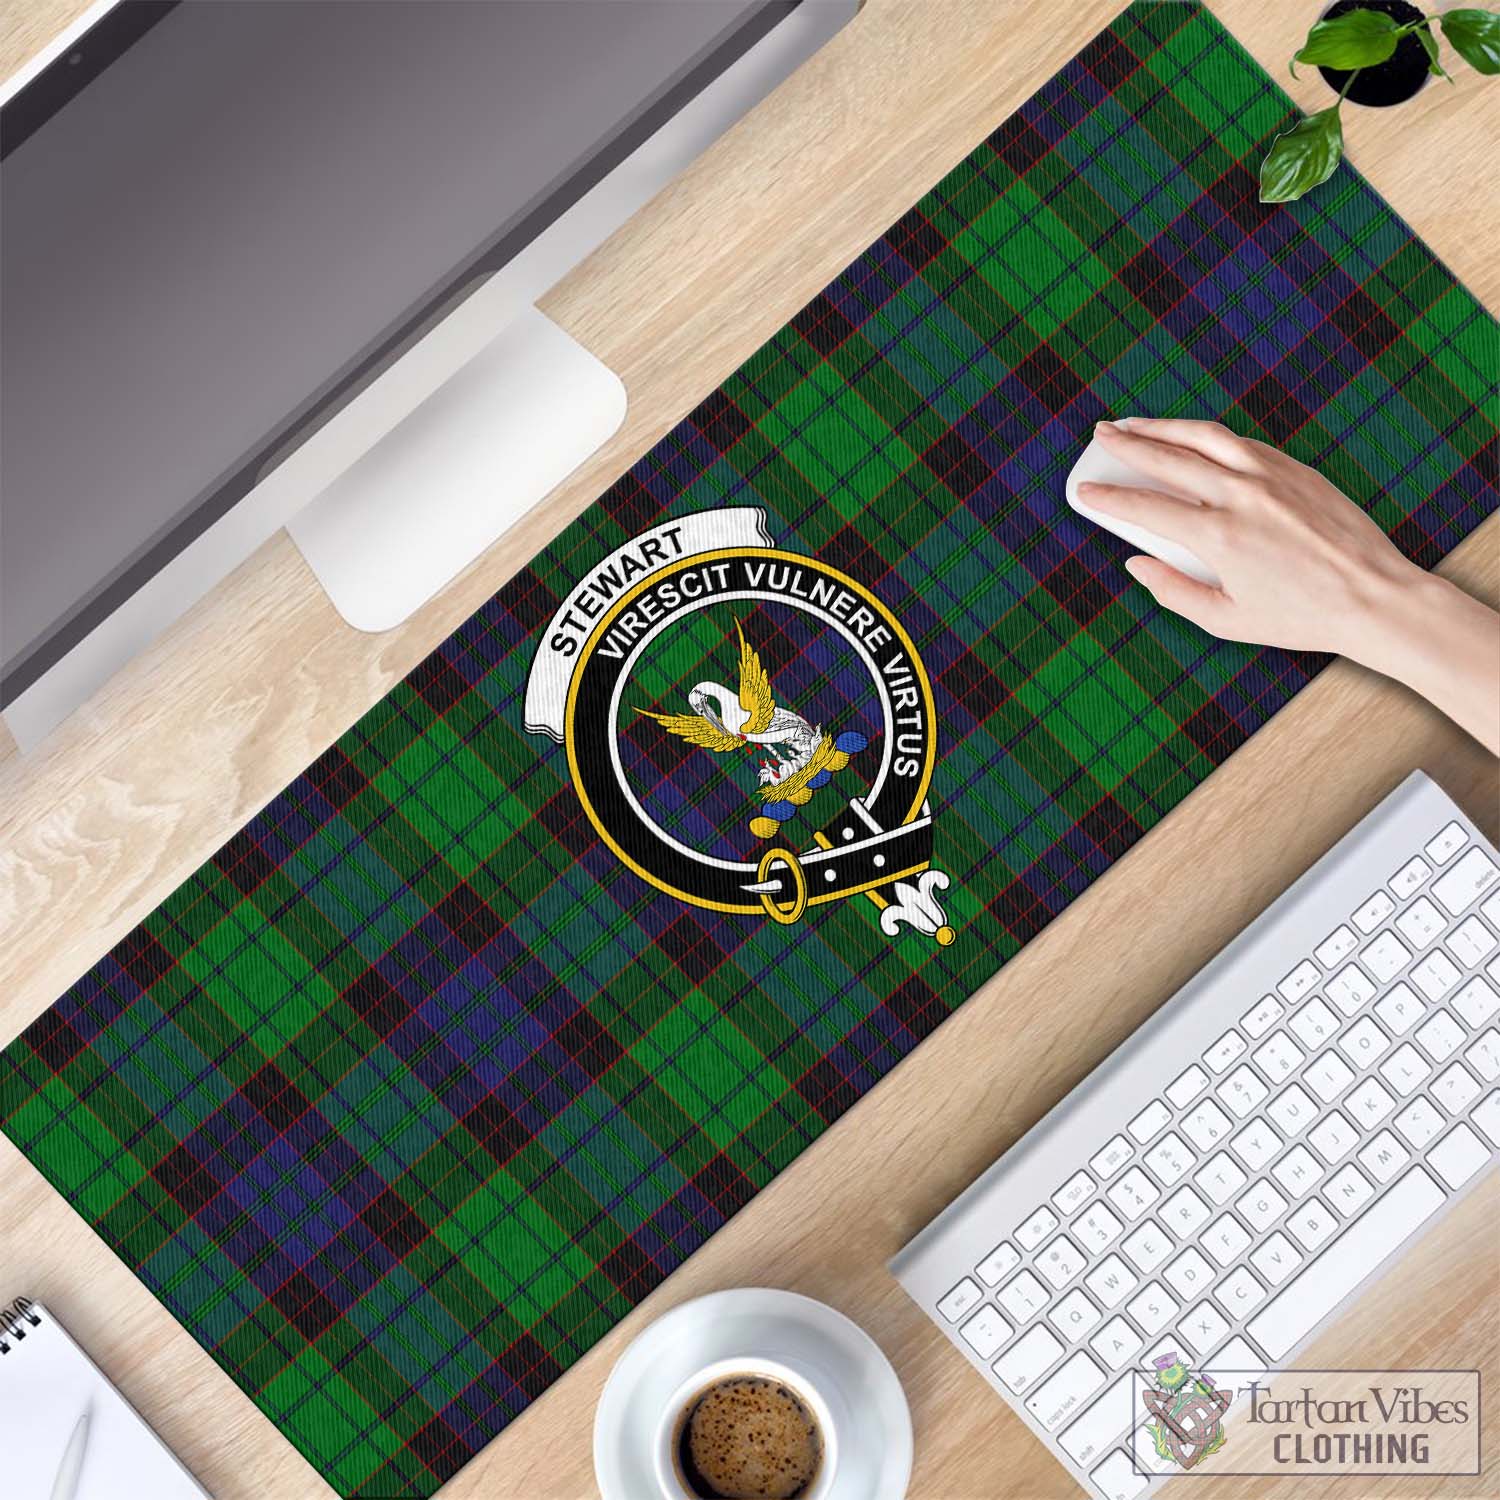 Tartan Vibes Clothing Stewart Old Modern Tartan Mouse Pad with Family Crest